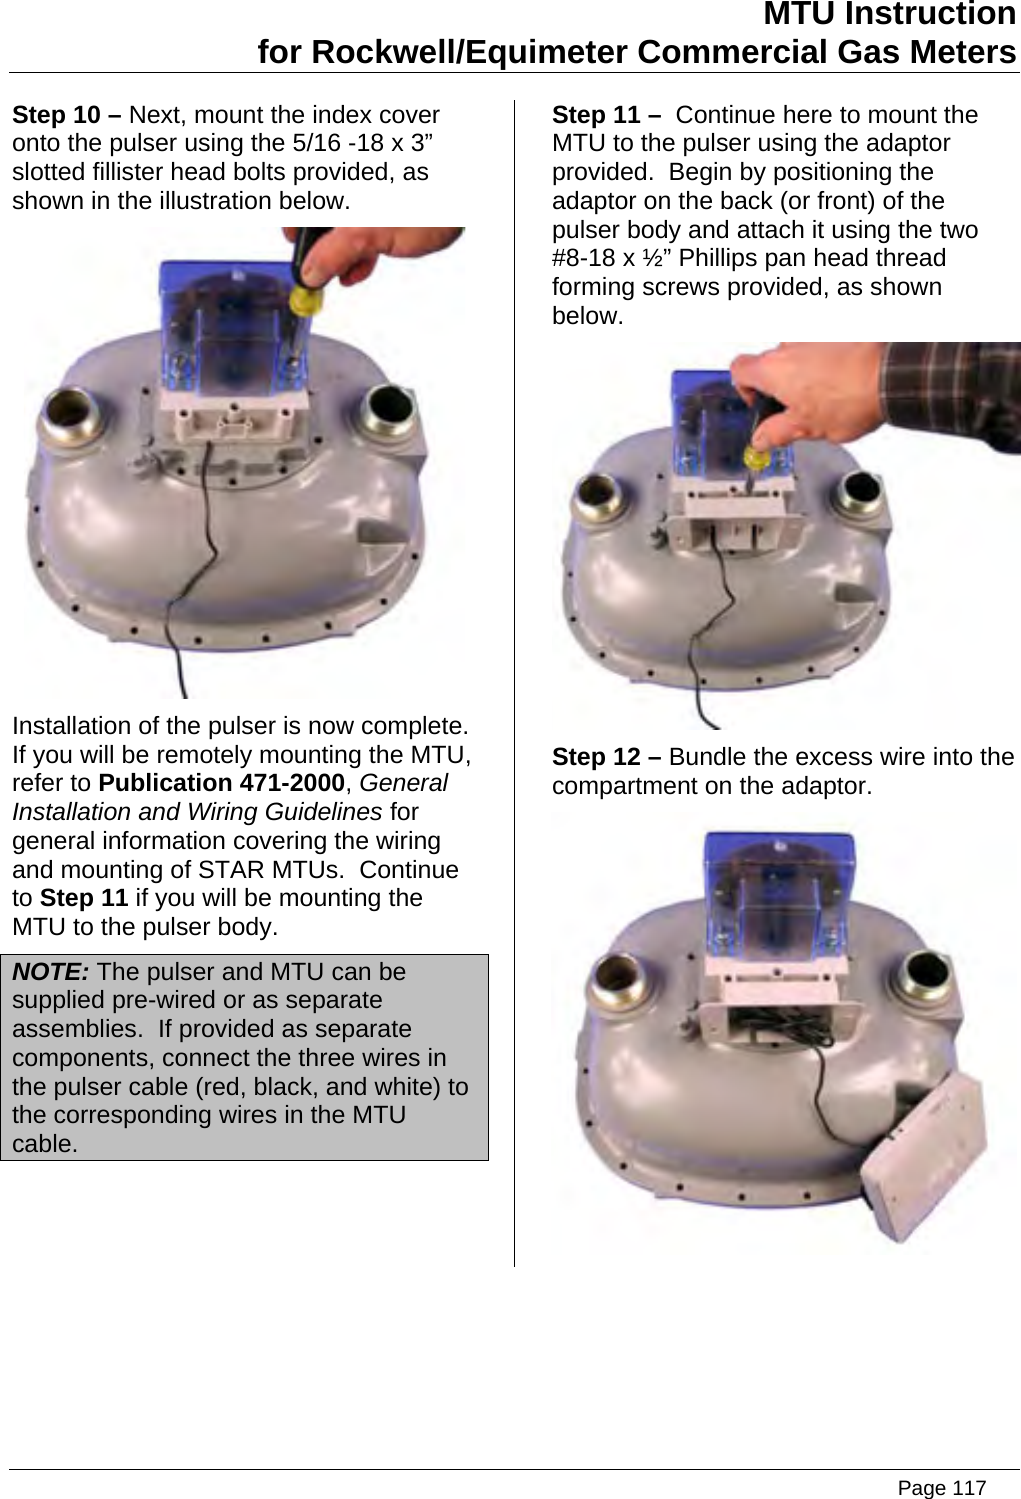 MTU Instruction for Rockwell/Equimeter Commercial Gas Meters Step 10 – Next, mount the index cover onto the pulser using the 5/16 -18 x 3” slotted fillister head bolts provided, as shown in the illustration below.  Installation of the pulser is now complete.  If you will be remotely mounting the MTU, refer to Publication 471-2000, General Installation and Wiring Guidelines for general information covering the wiring and mounting of STAR MTUs.  Continue to Step 11 if you will be mounting the MTU to the pulser body. NOTE: The pulser and MTU can be supplied pre-wired or as separate assemblies.  If provided as separate components, connect the three wires in the pulser cable (red, black, and white) to the corresponding wires in the MTU cable. Step 11 –  Continue here to mount the MTU to the pulser using the adaptor provided.  Begin by positioning the adaptor on the back (or front) of the pulser body and attach it using the two #8-18 x ½” Phillips pan head thread forming screws provided, as shown below.  Step 12 – Bundle the excess wire into the compartment on the adaptor.    Page 117